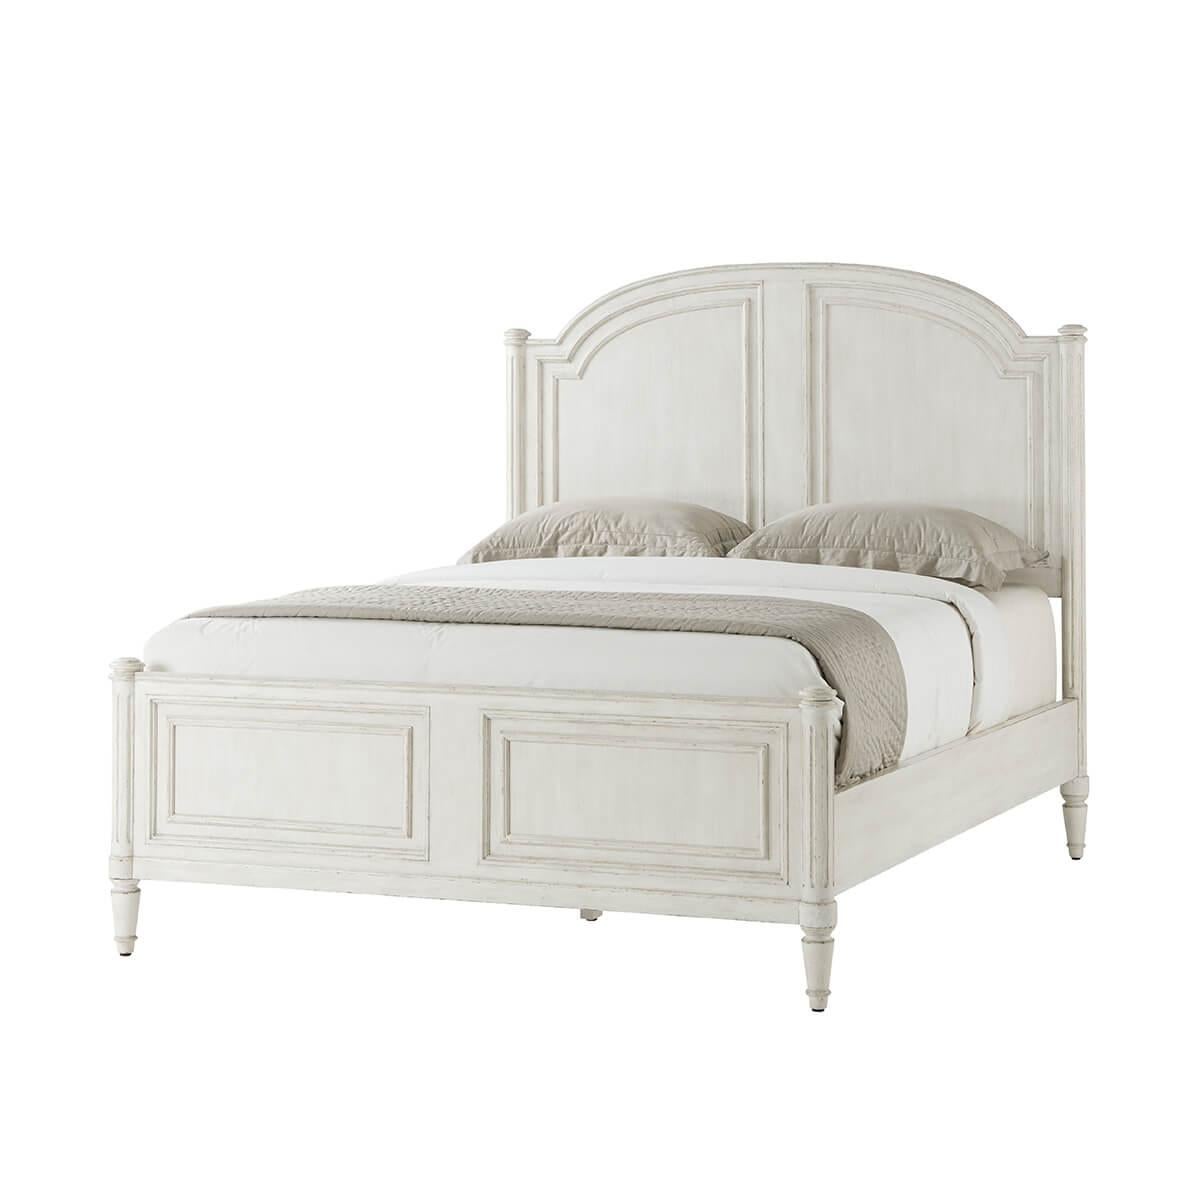 A white washed painted four post queen size bed with carved arch panel headboard and paneled footboard with turned posts having ball finials and raised on fluted styles and turned and tapered feet.

Dimensions: 65.75